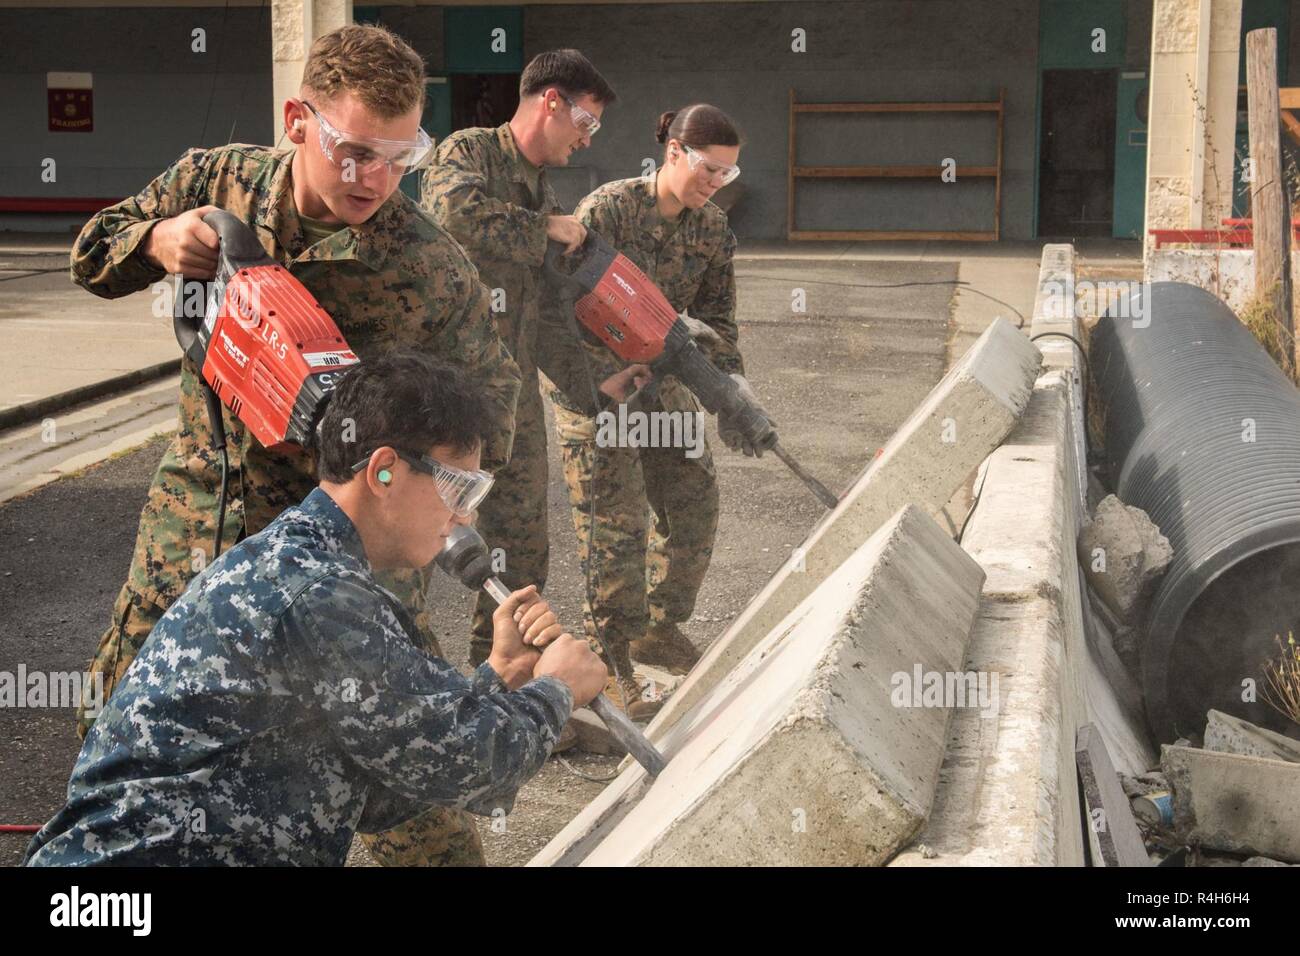 SAN FRANCISCO (Oct. 2, 2018) Sailors and Marines practice concrete breaching techniques during the annual Defense Support of Civil Authorities (DSCA) exercise at San Francisco Fleet Week (SFFW) 2018. SFFW is an opportunity for the American public to meet their Navy, Marine Corps and Coast Guard teams and experience America's sea services. During fleet week, service members participate in various community service events, showcase capabilities and equipment to the community, and enjoy the hospitality of San Francisco and its surrounding areas. Stock Photo